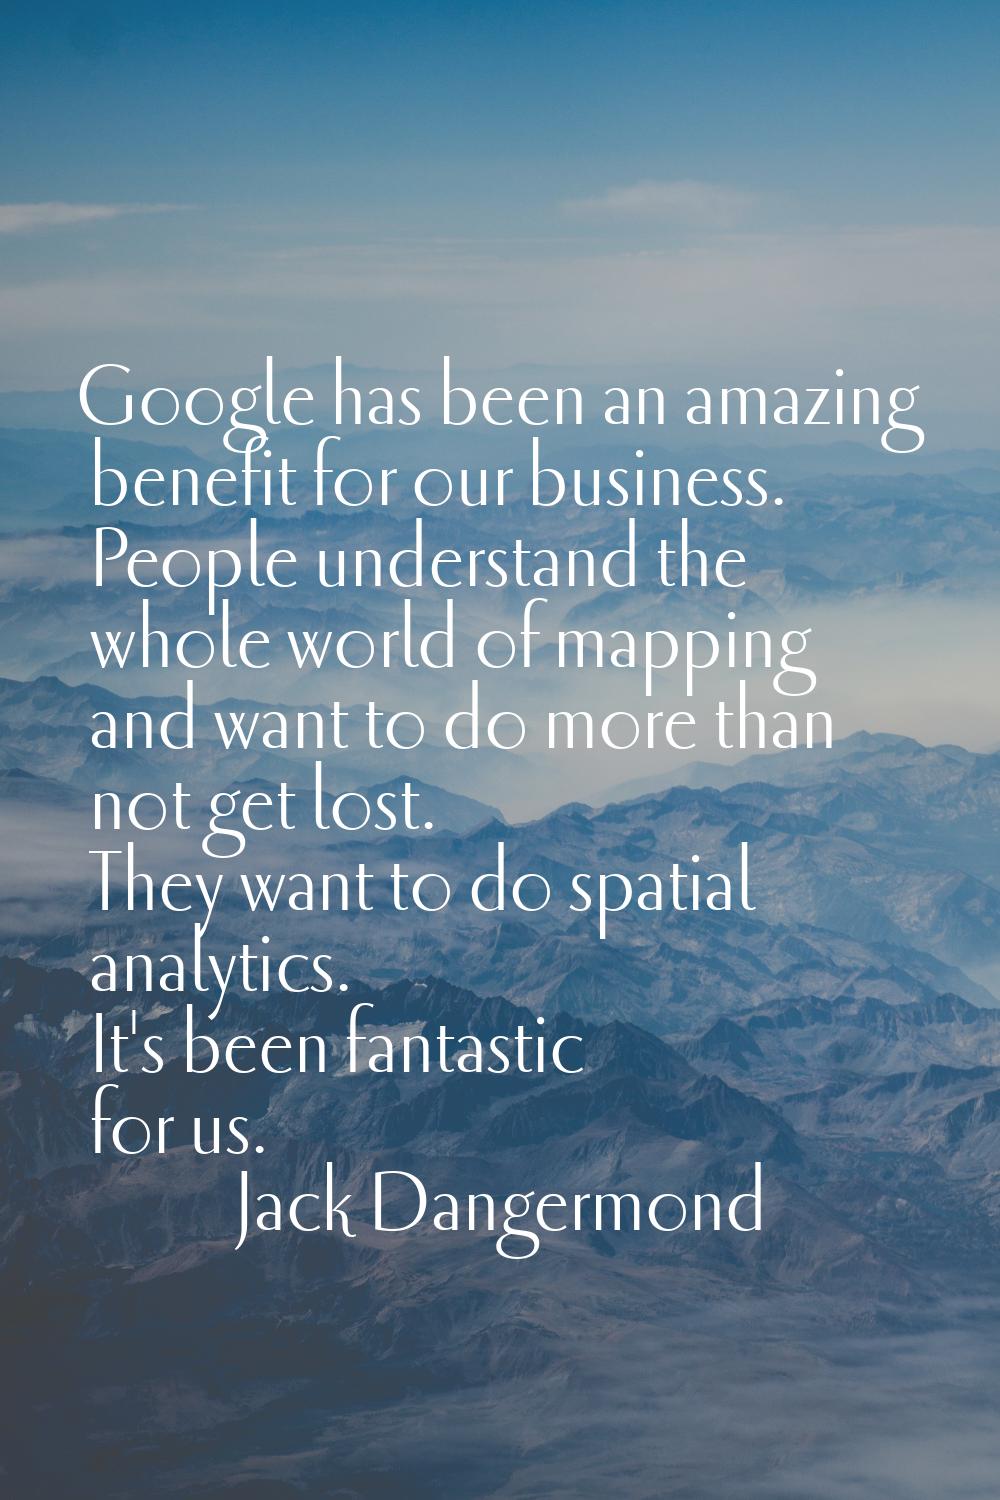 Google has been an amazing benefit for our business. People understand the whole world of mapping a